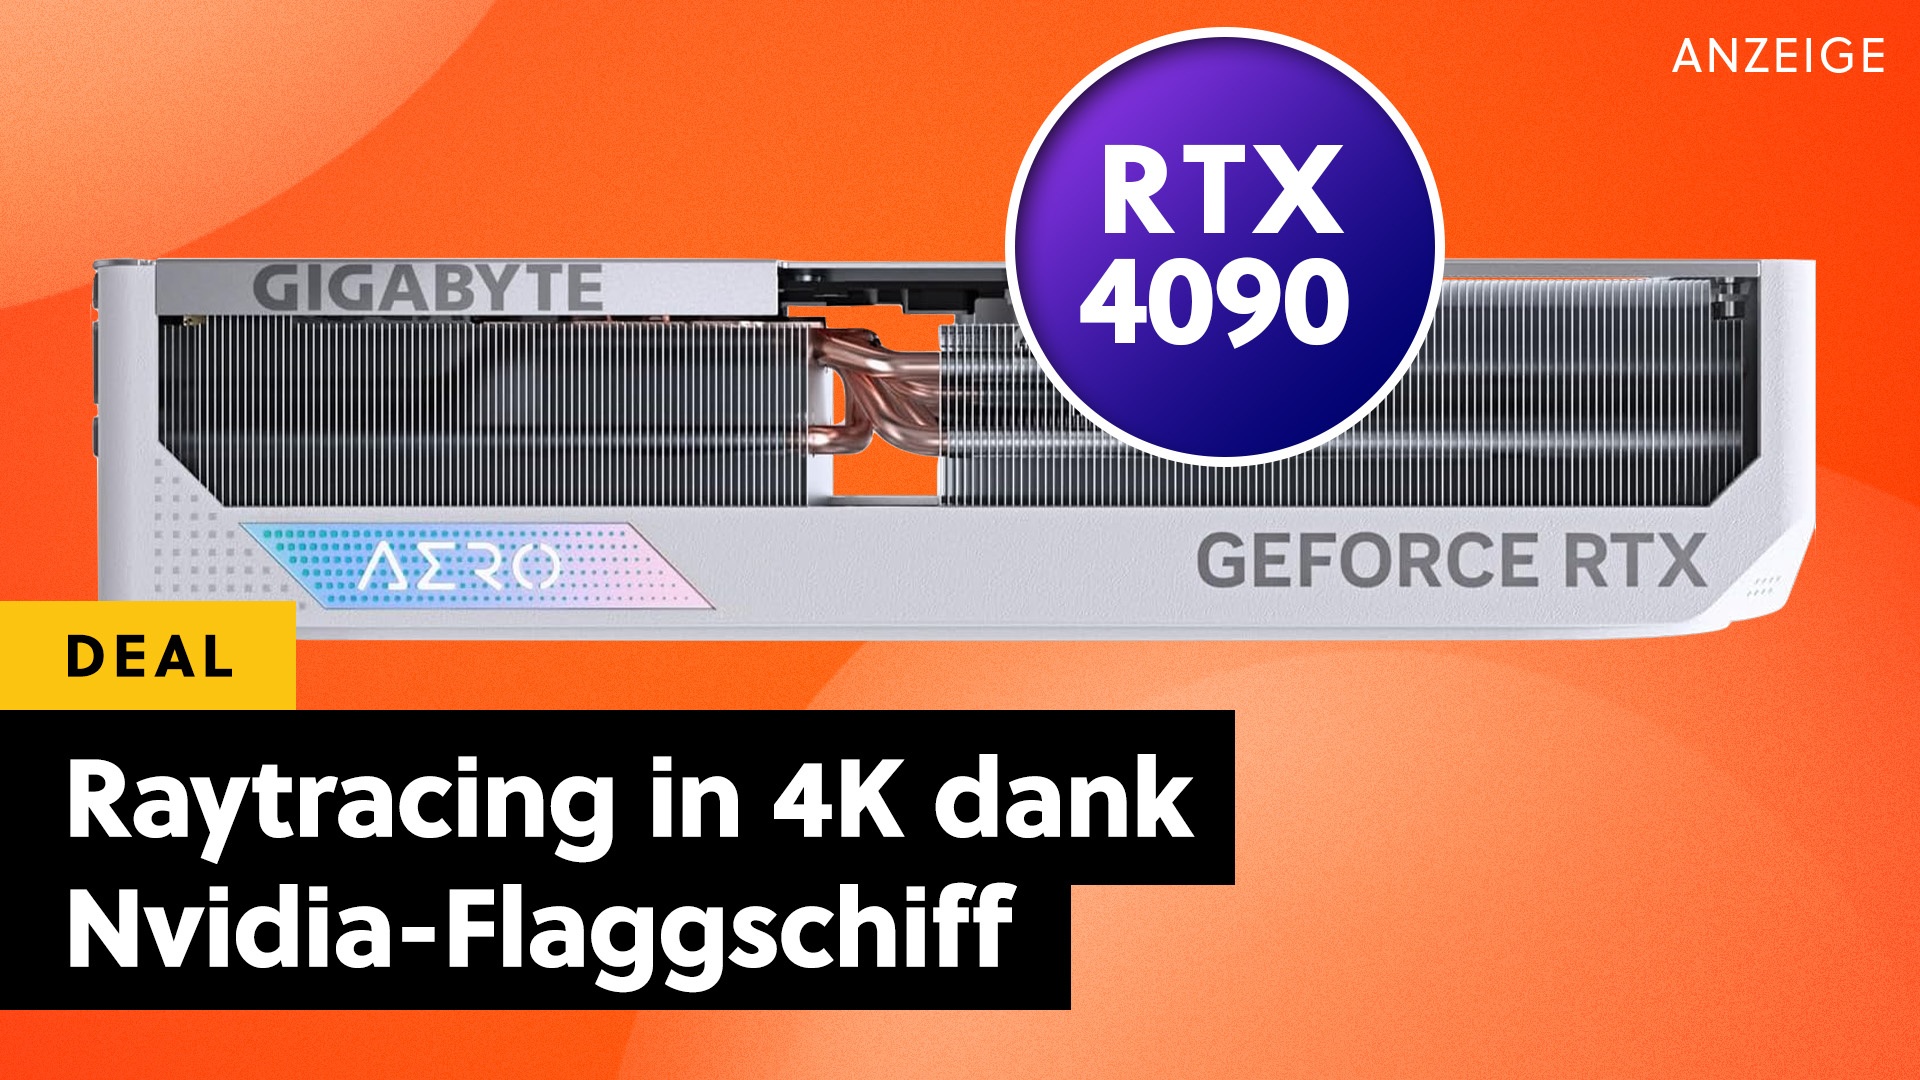 Do you want the world's most powerful graphics card, 4K gaming, and ray tracing?  These are the current RTX 4090 offerings